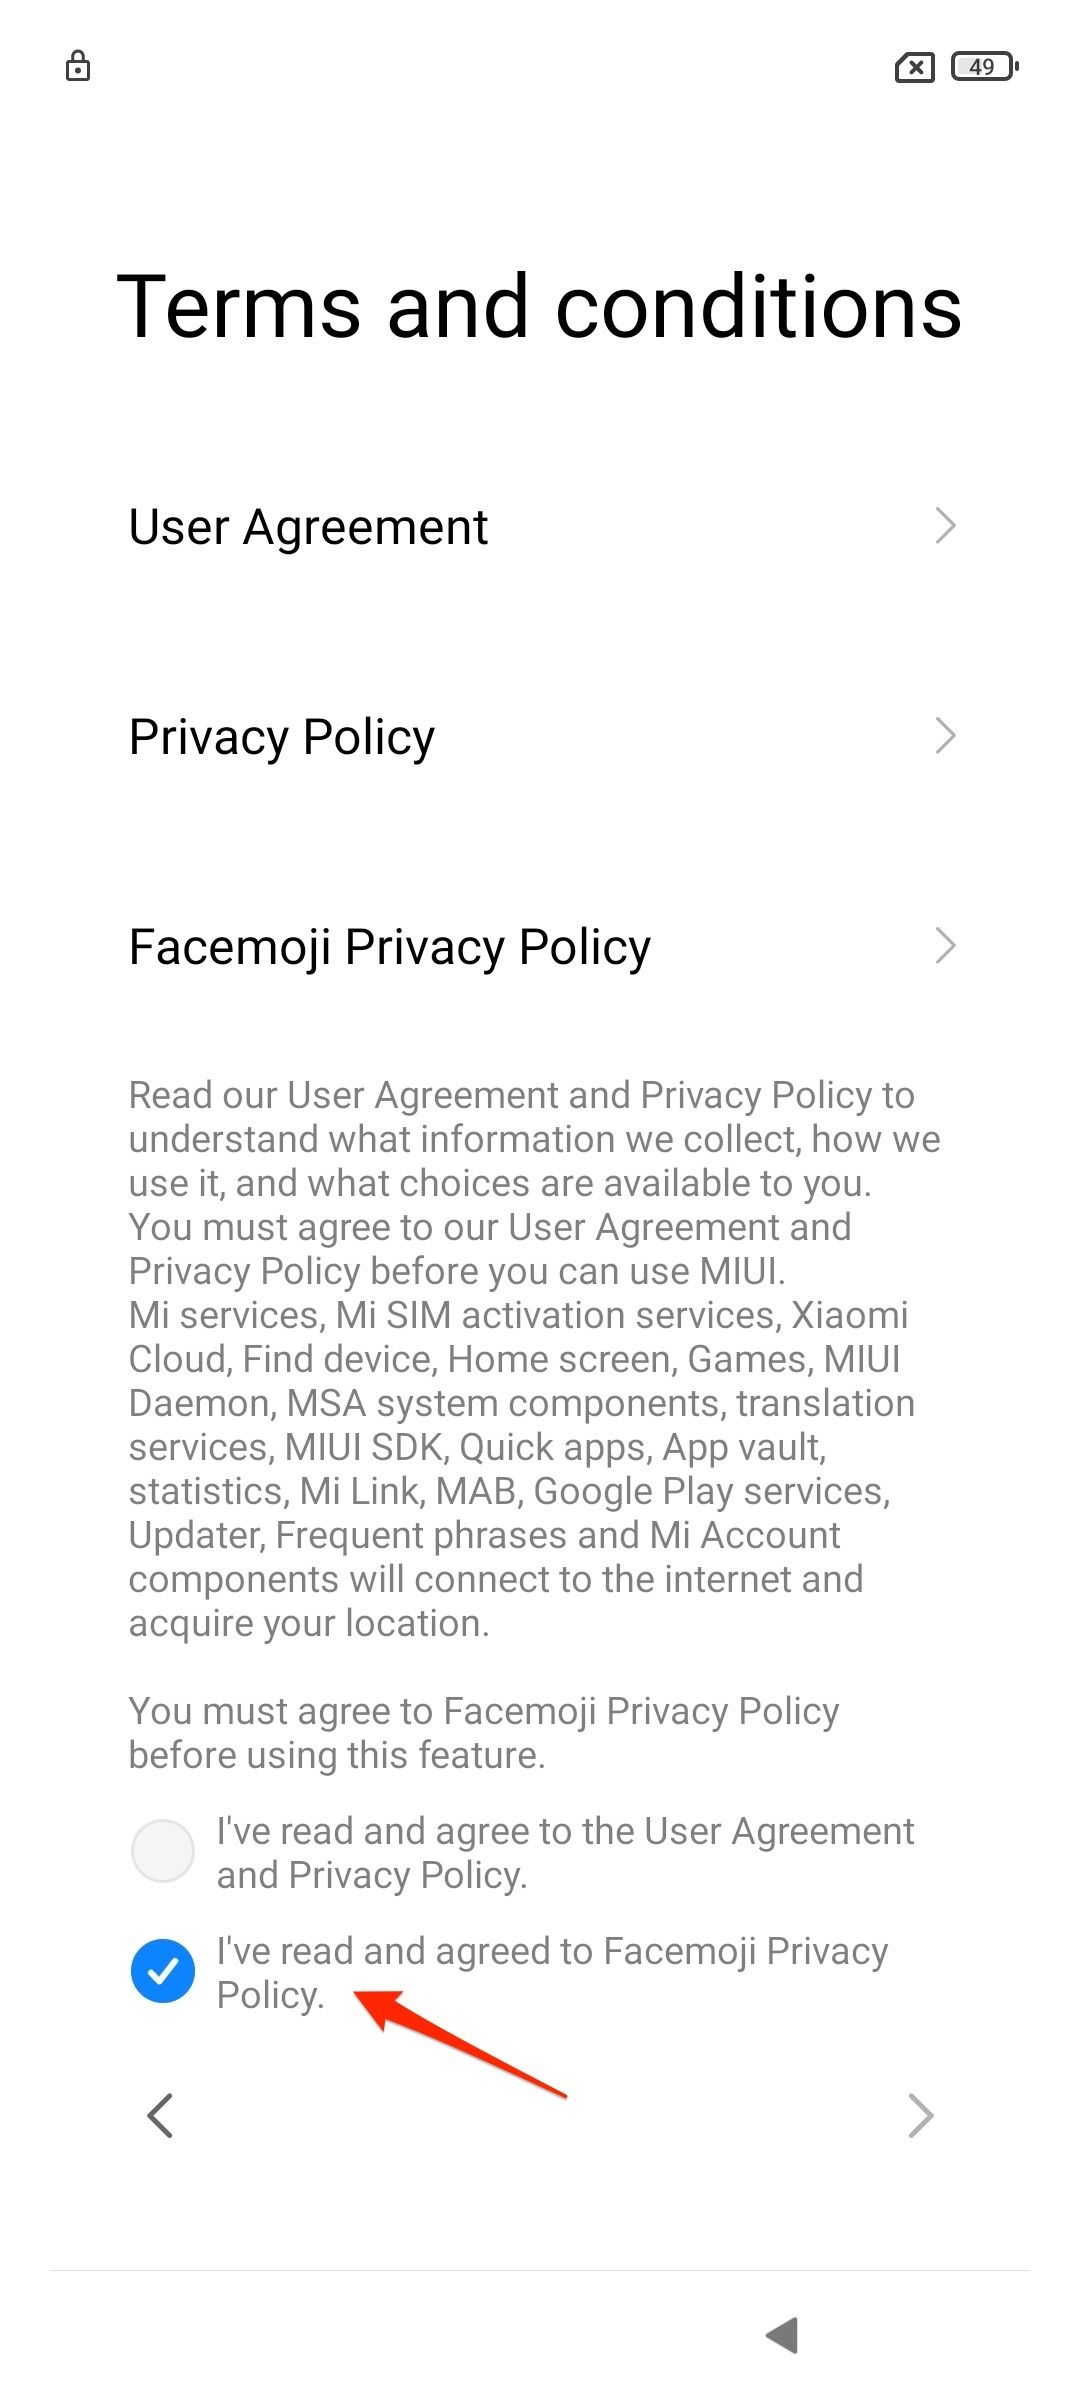 Accepting terms and conditions of setting up Xiaomi phone